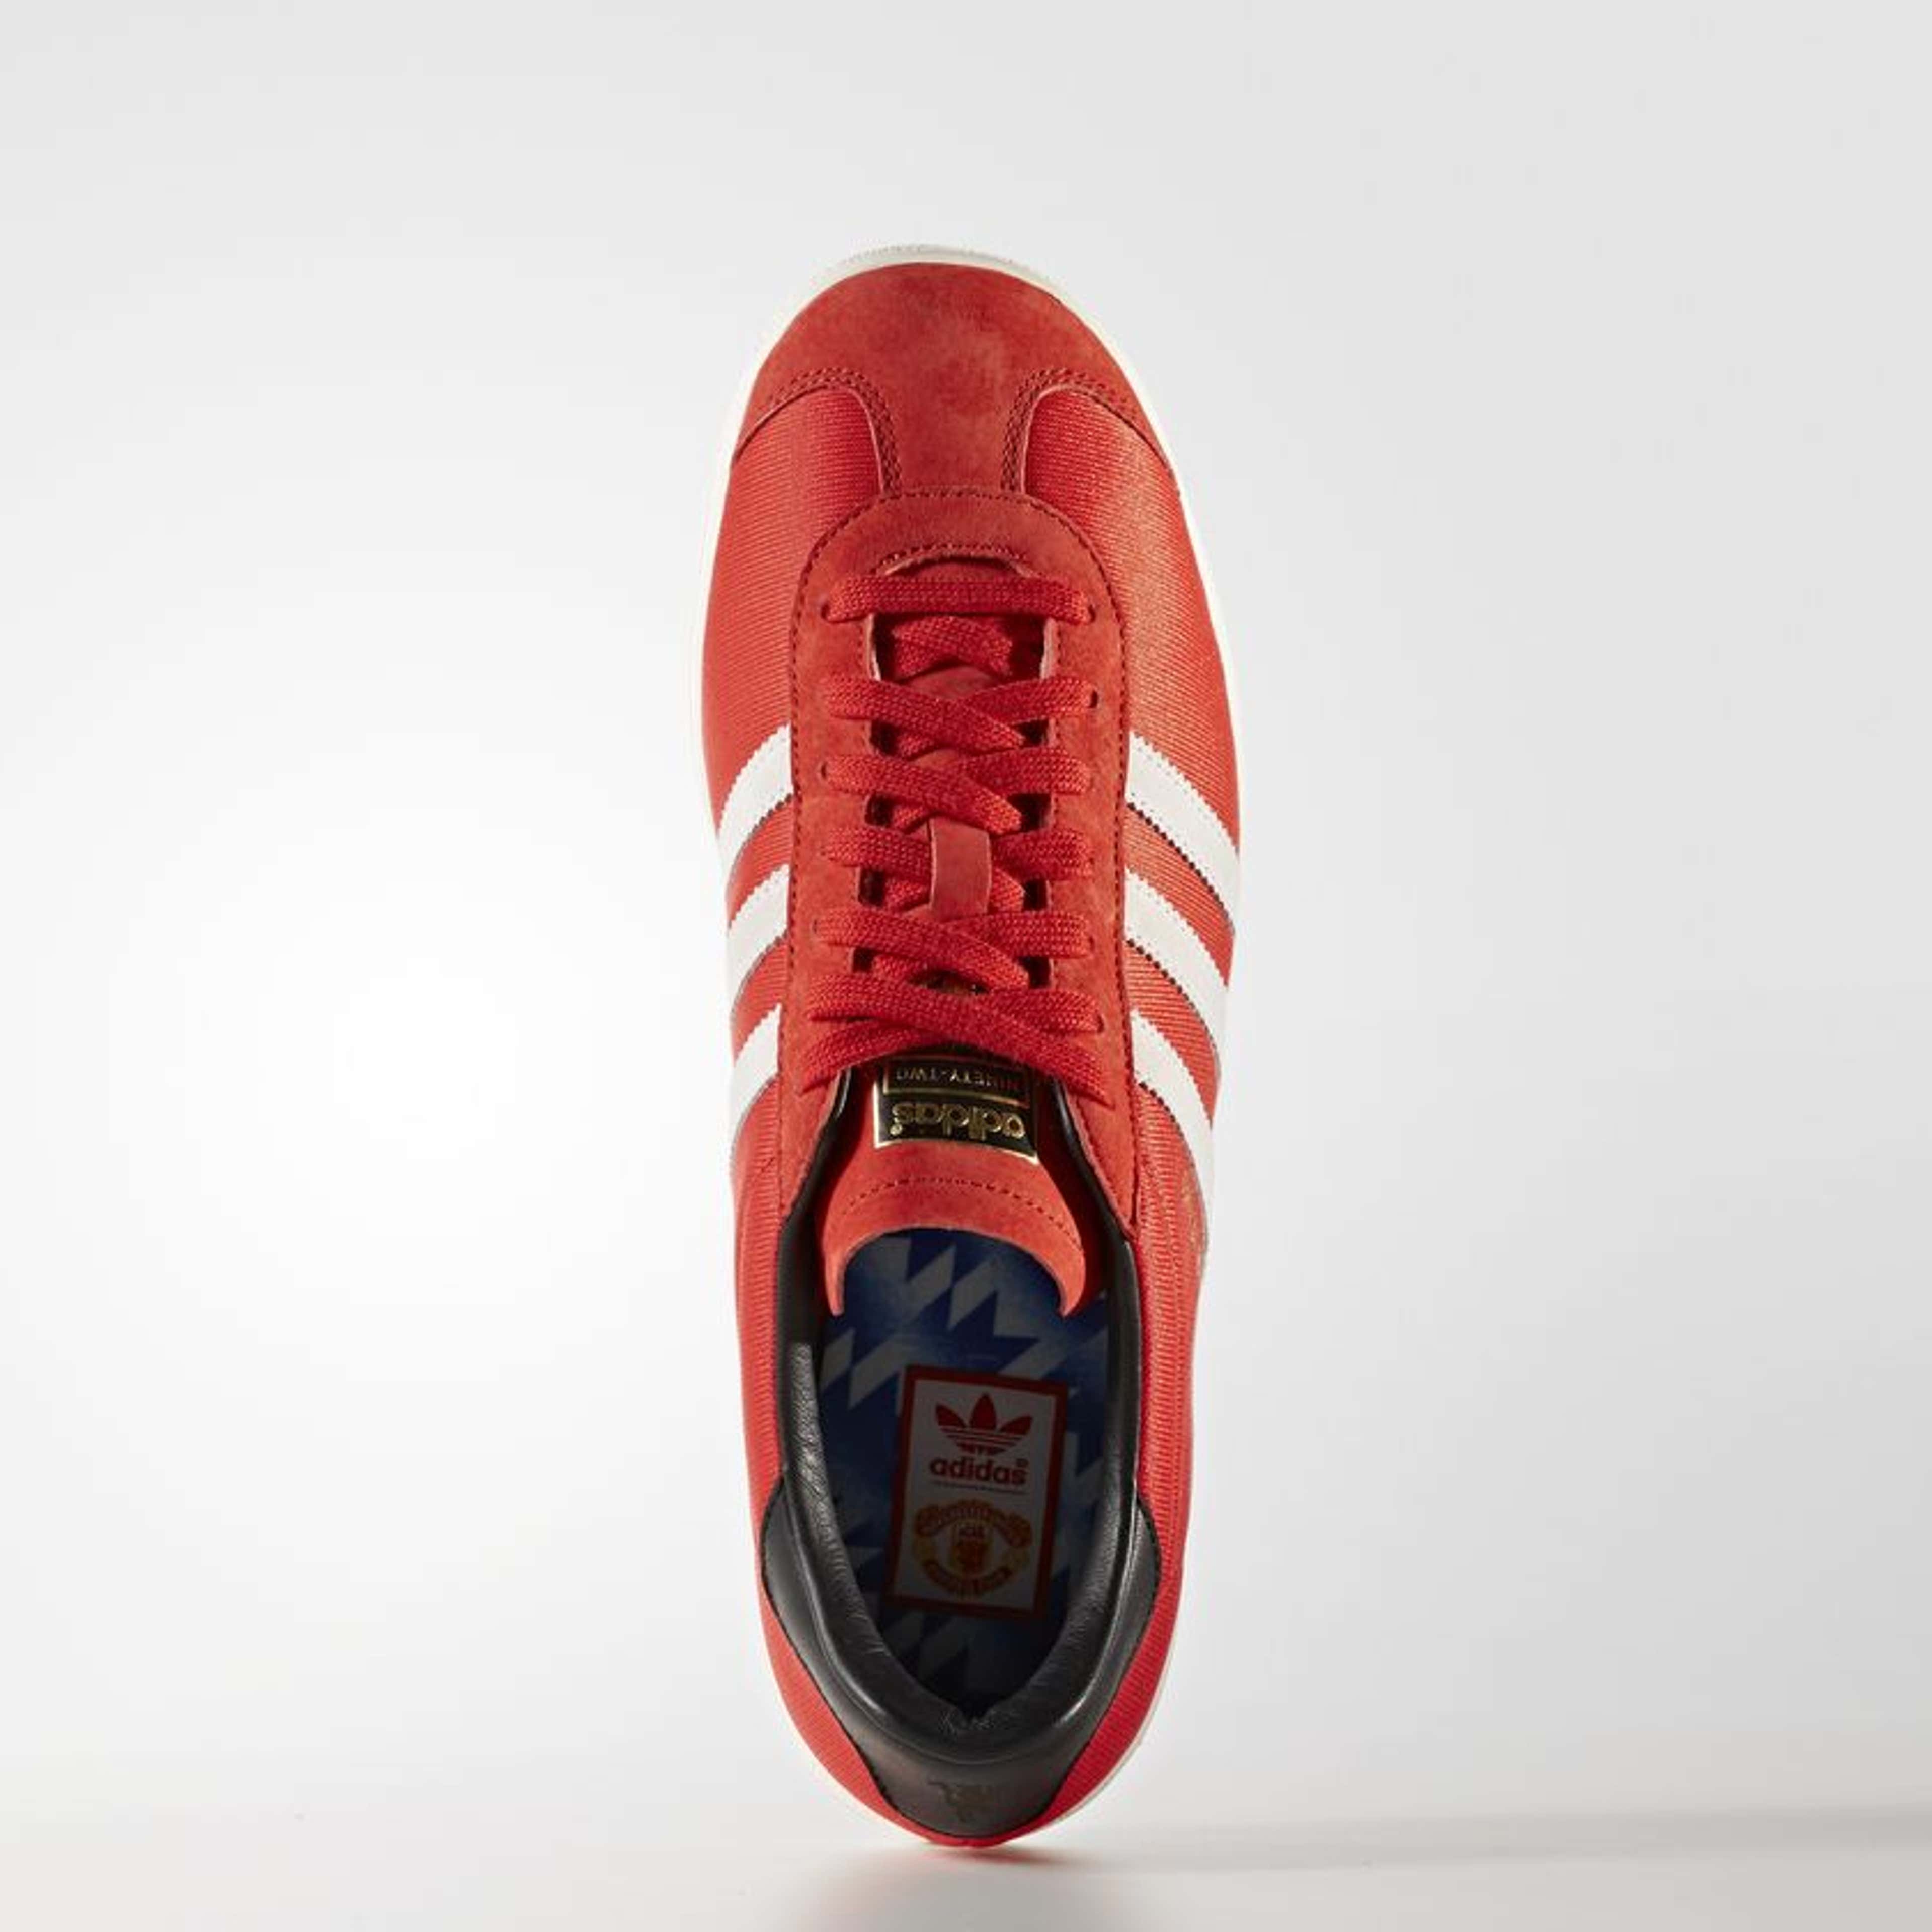 Embed only Adidas Class of '92